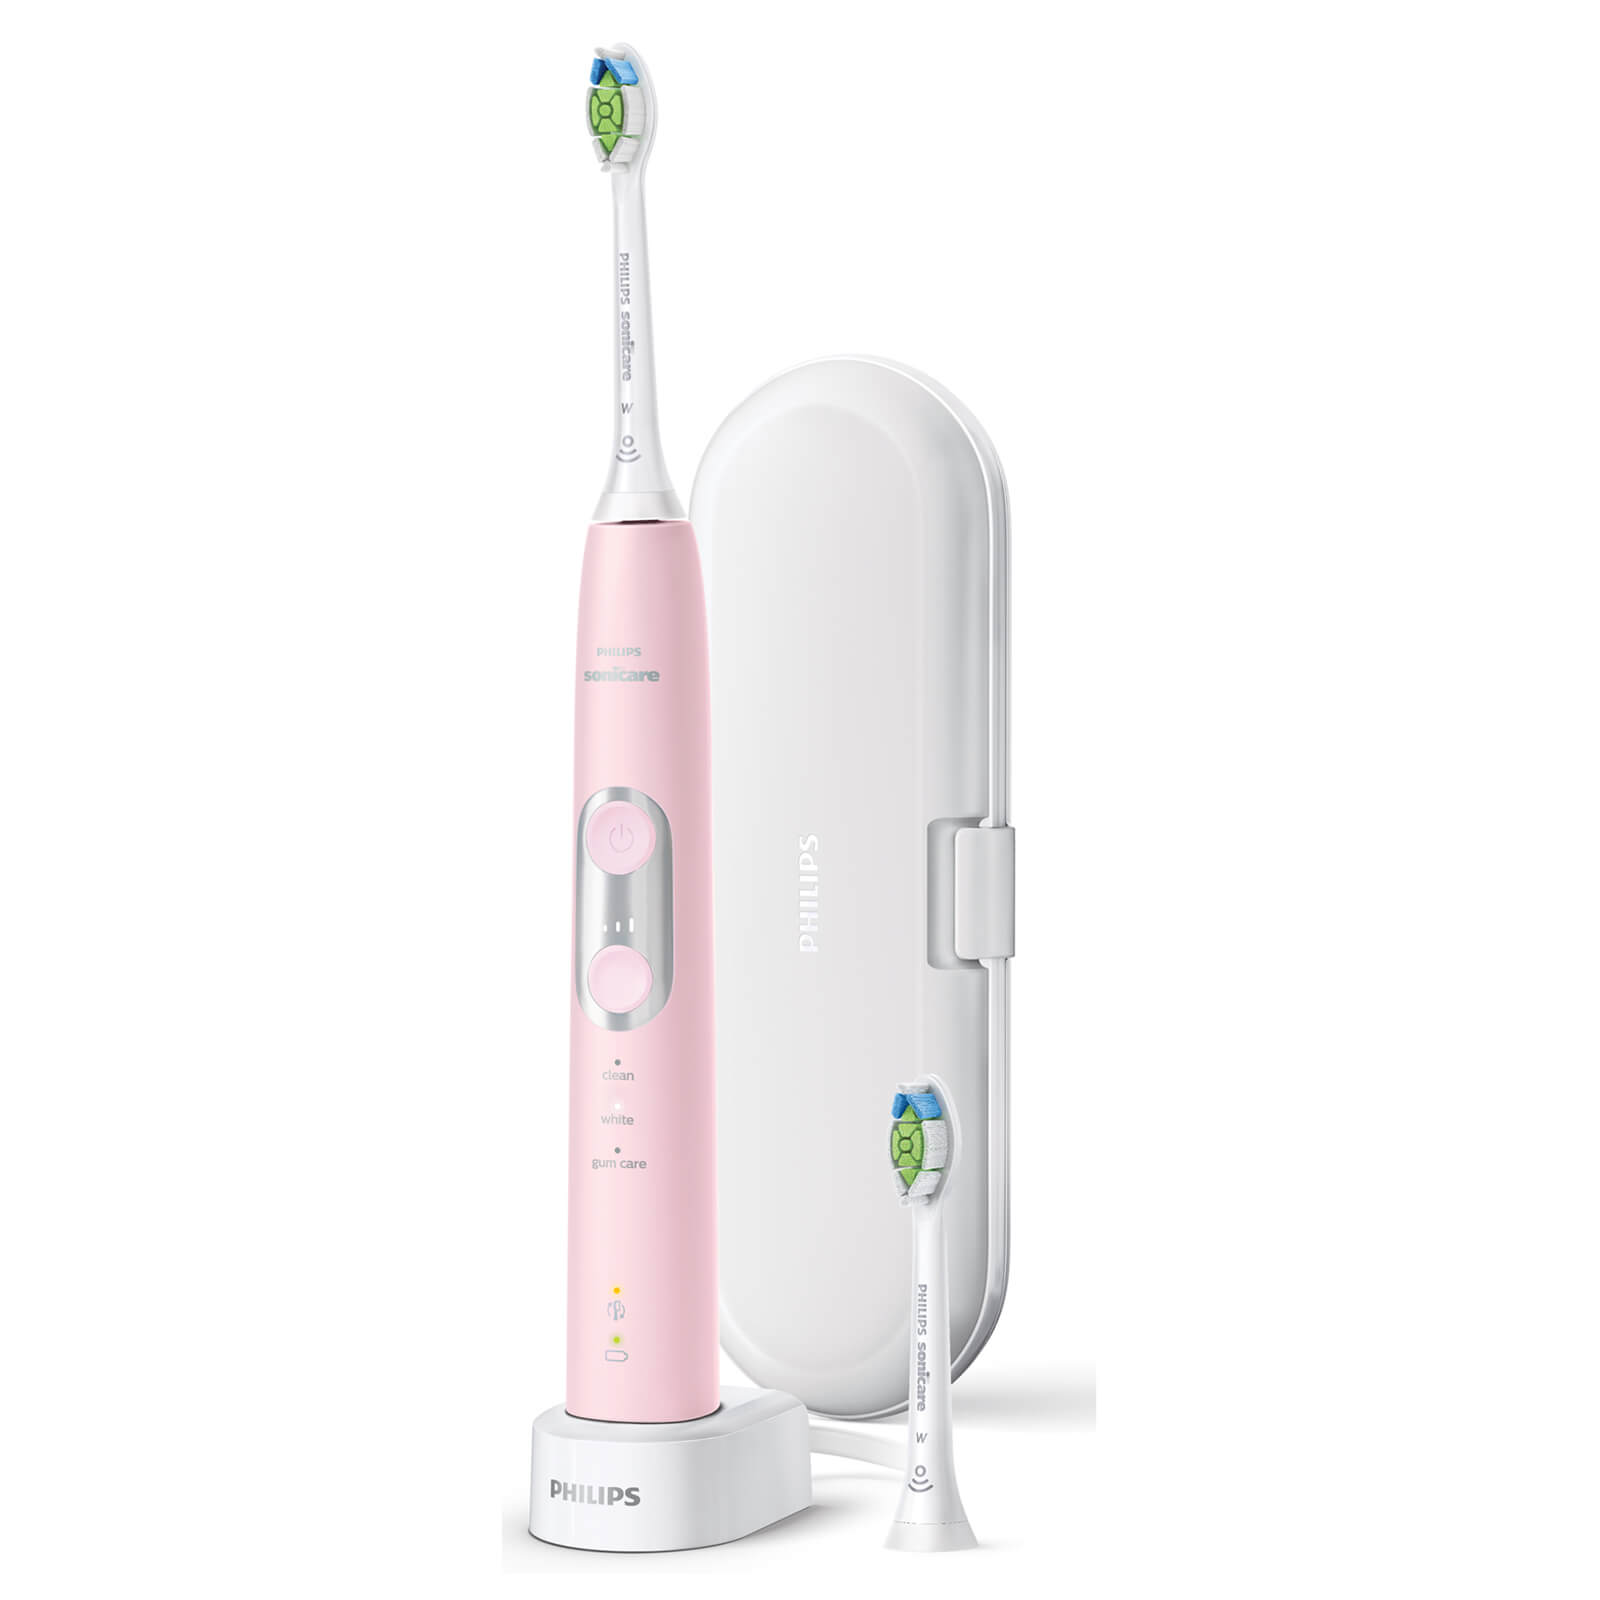 Philips Sonicare ProtectiveClean 6100 Electric Toothbrush with Travel Case - Pink